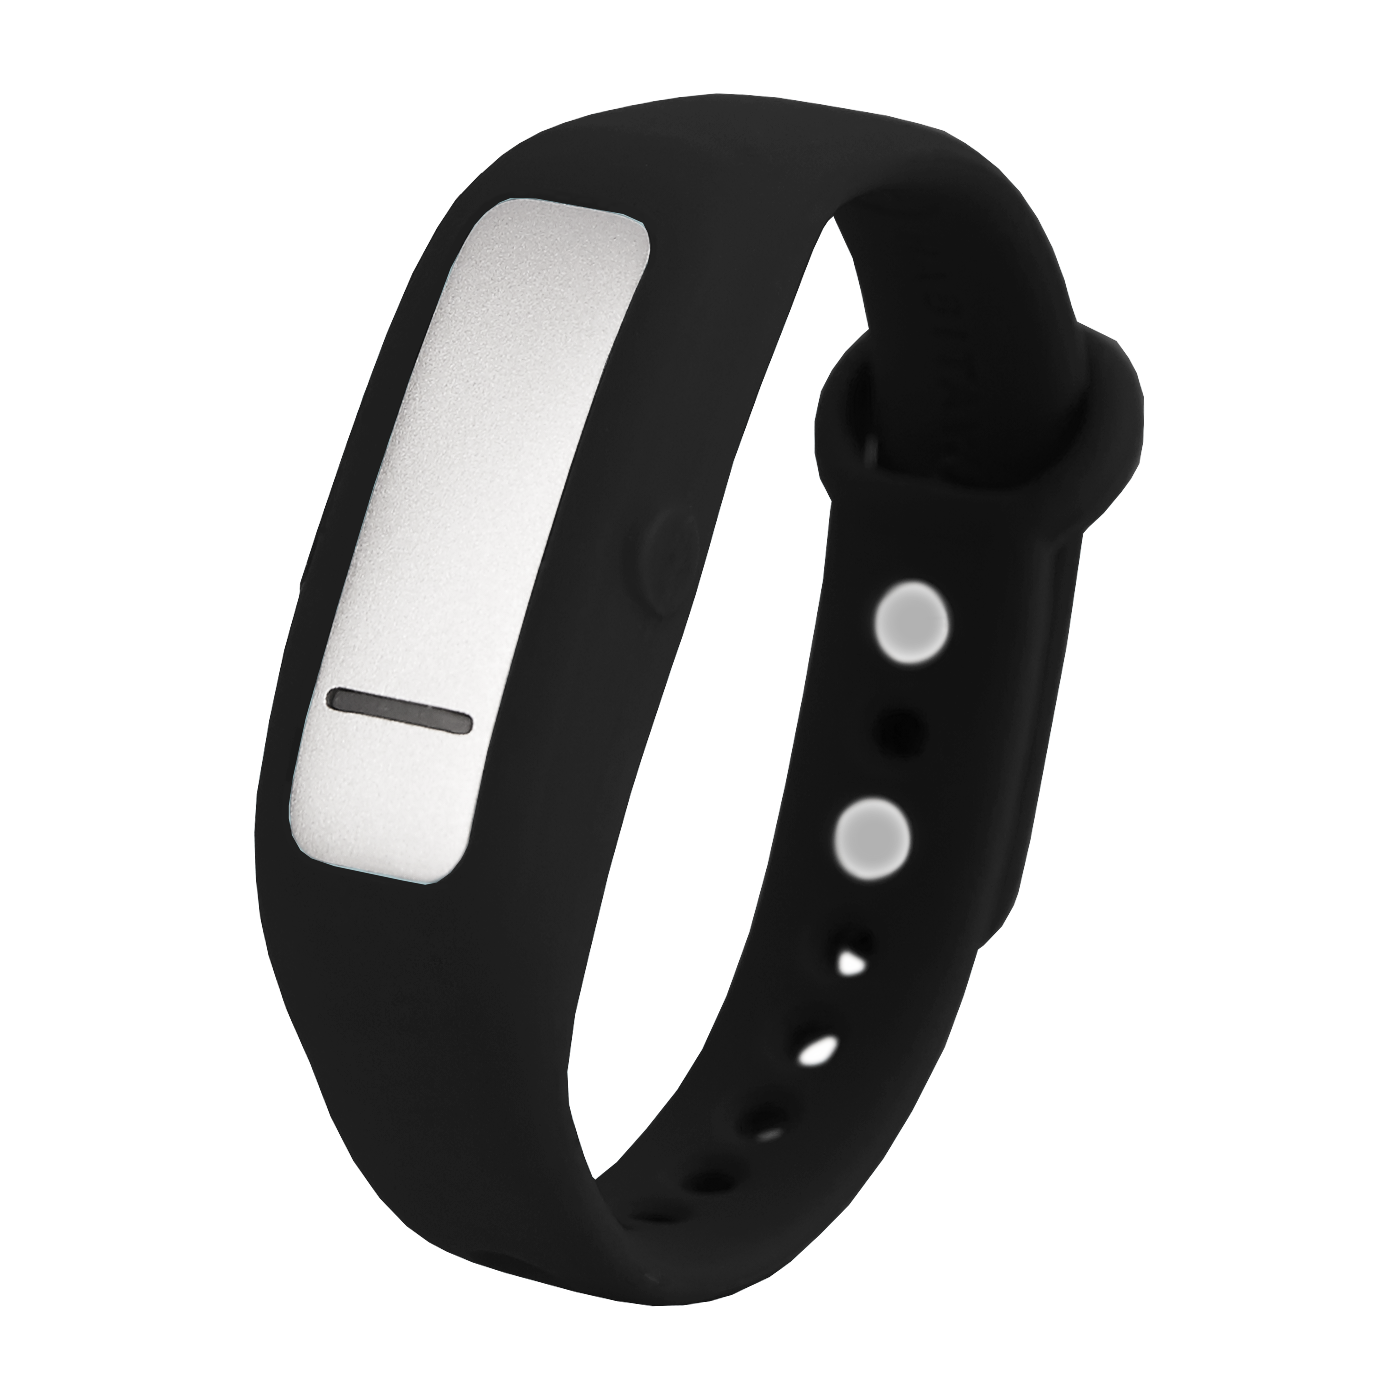 A black wristband with a silver button.